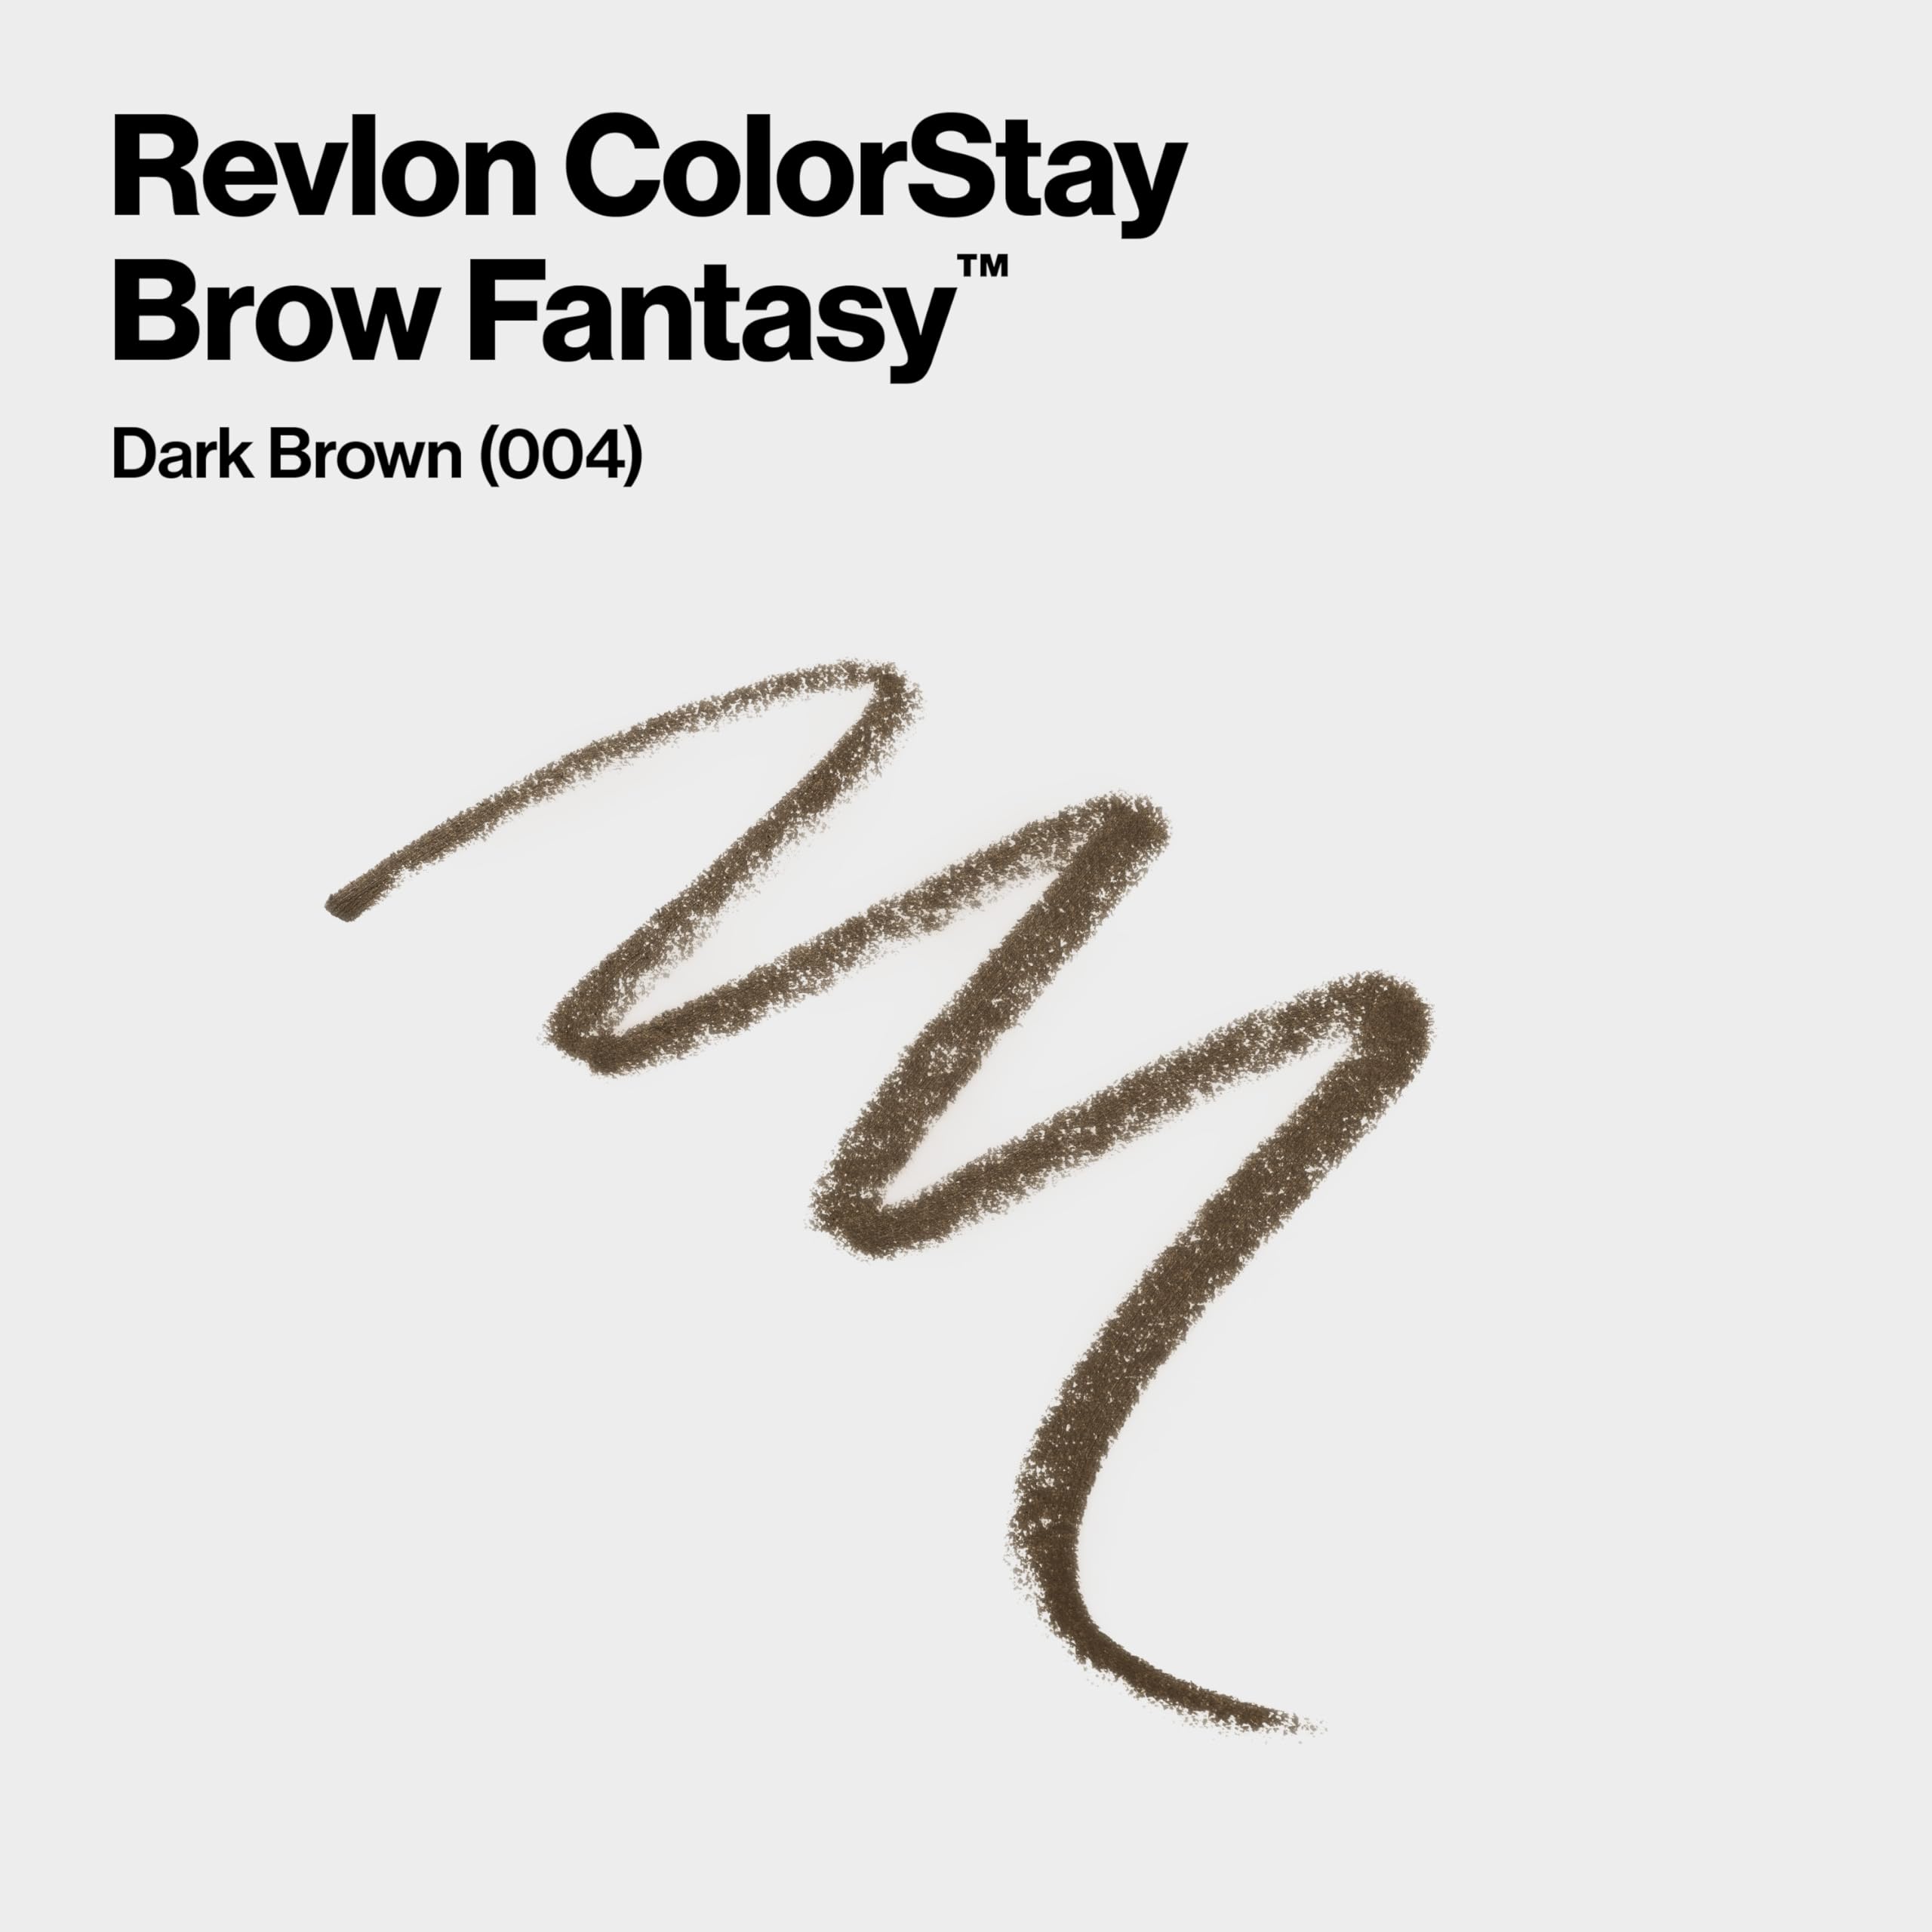 Revlon ColorStay Brow Fantasy, All In One Eyebrow Powder Pencil with Shaping Clear Gel, Gel Infused with Panthenol, Smudge-proof, 16HR Visibly Full Brows, 104 Dark Brown